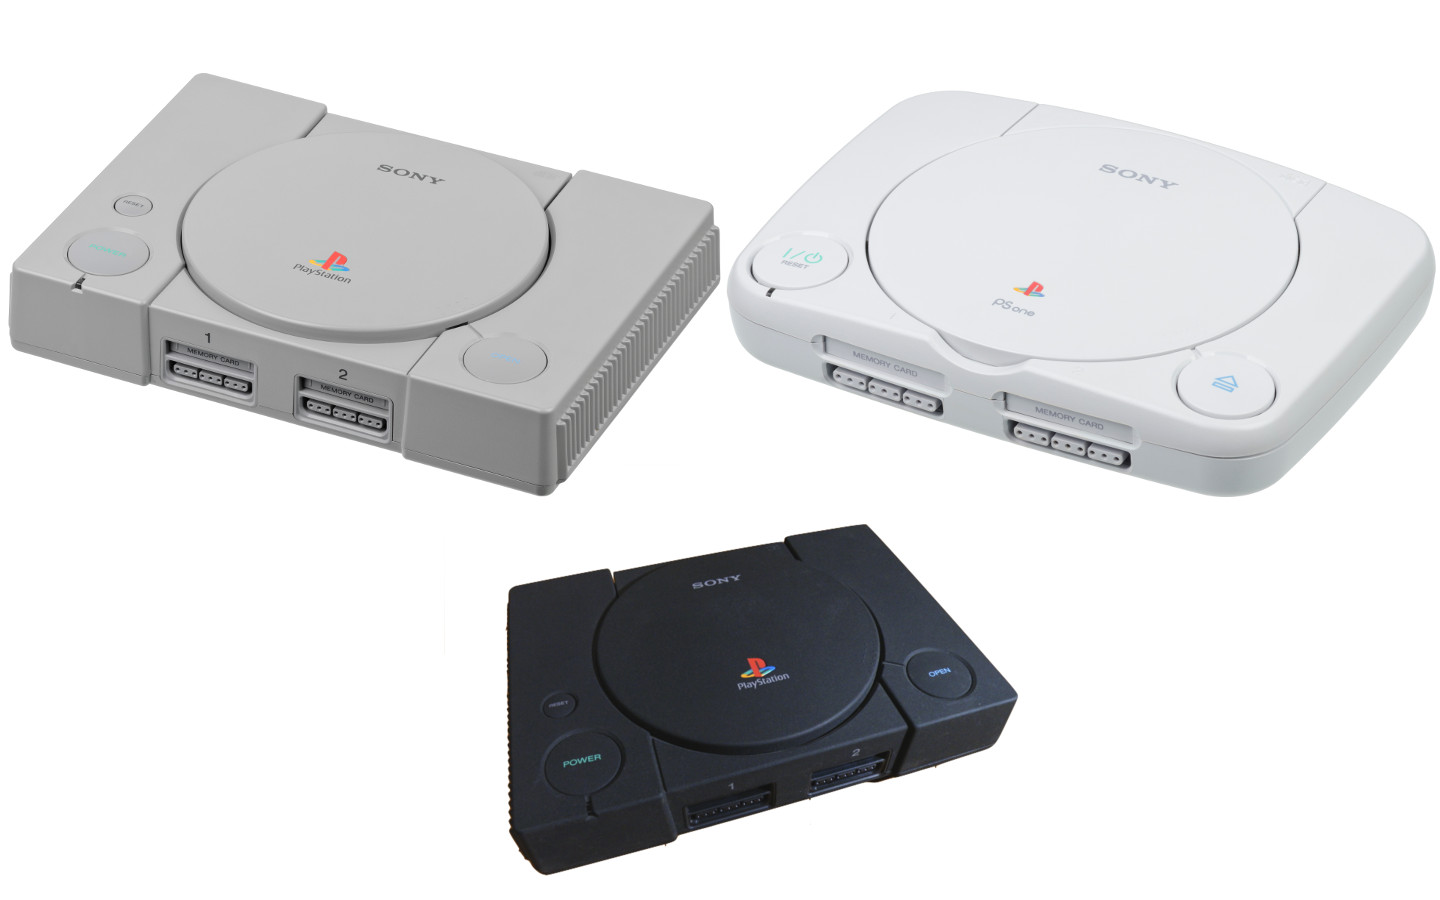 image of the various PlayStation models